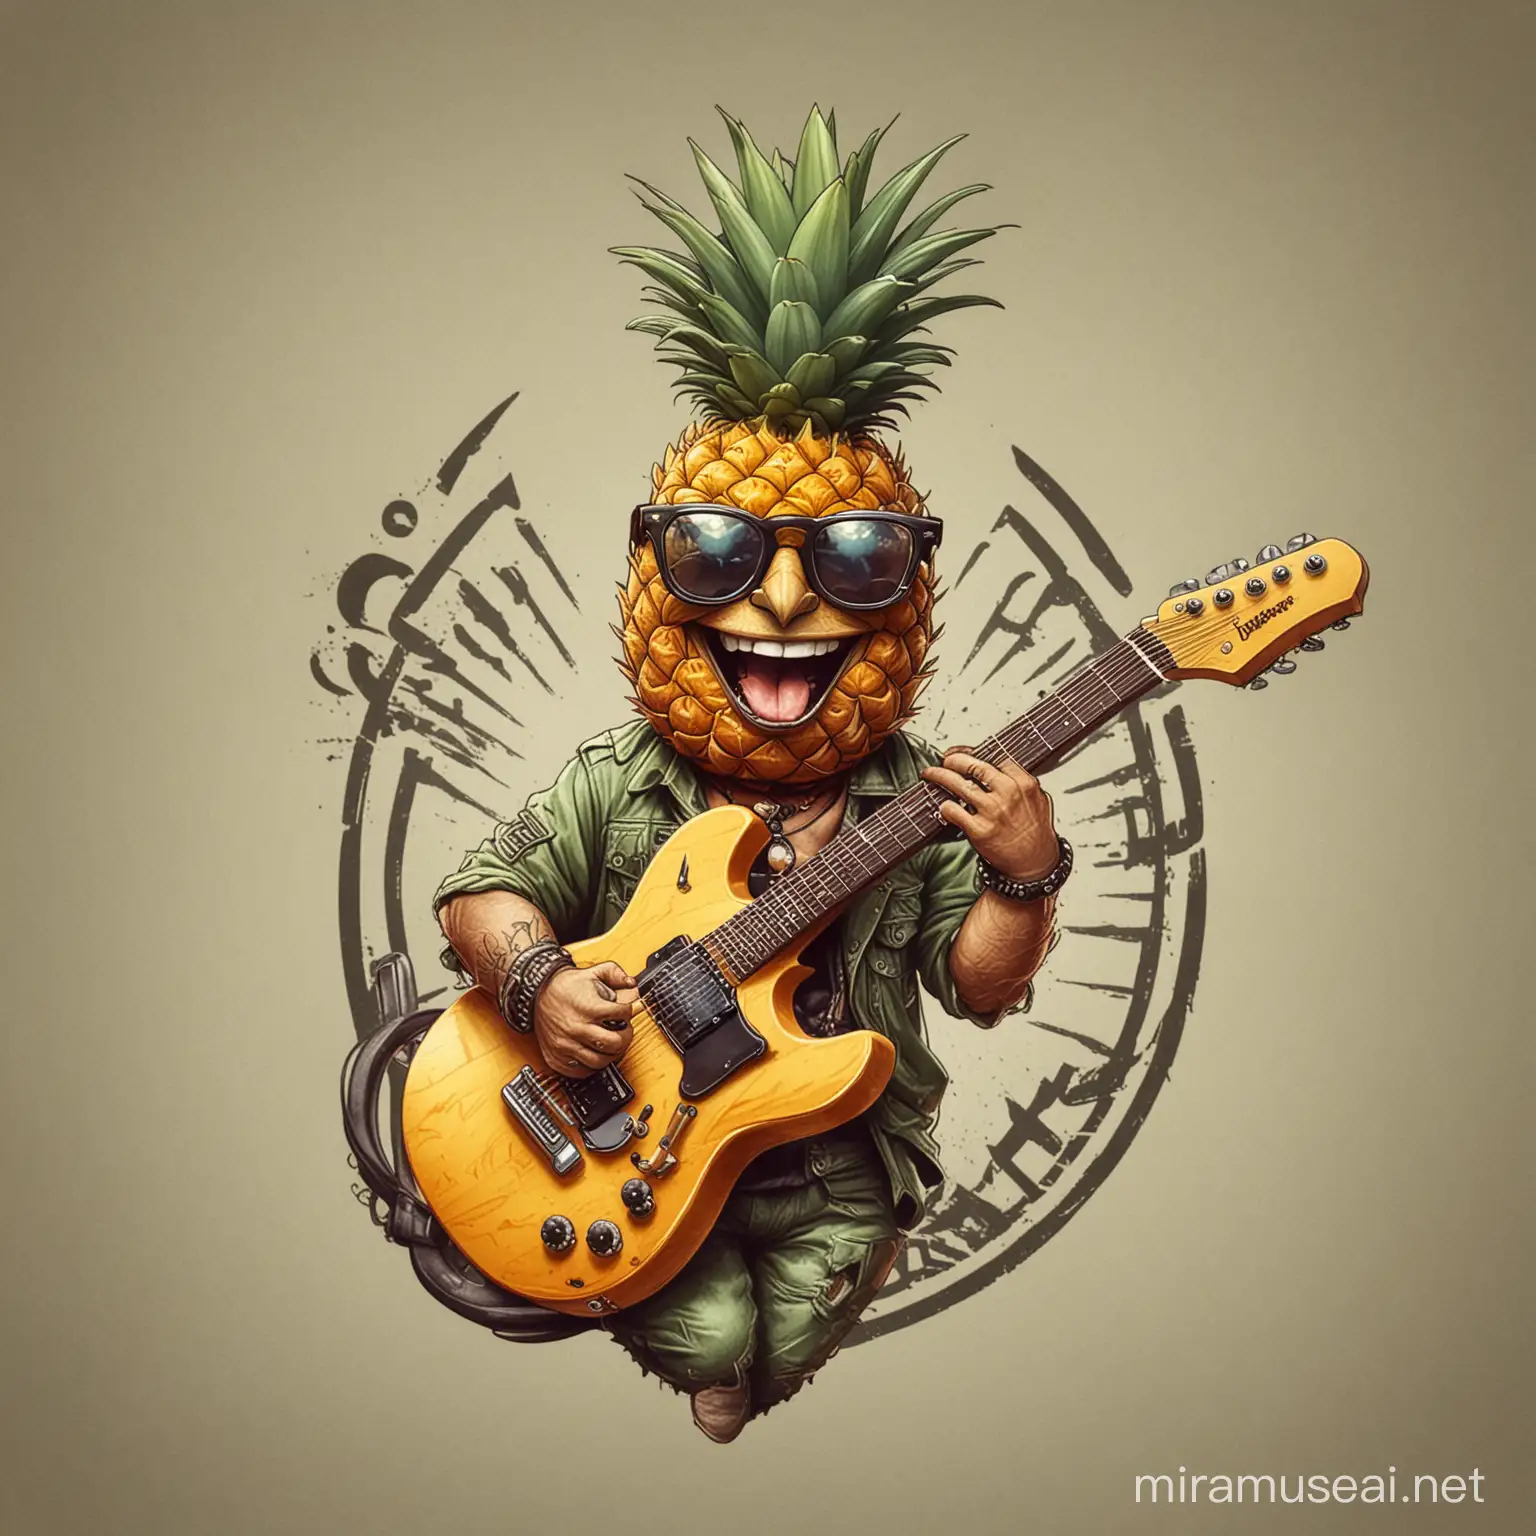 A logo of a pineapple rocker wearing glasses and an electric guitar